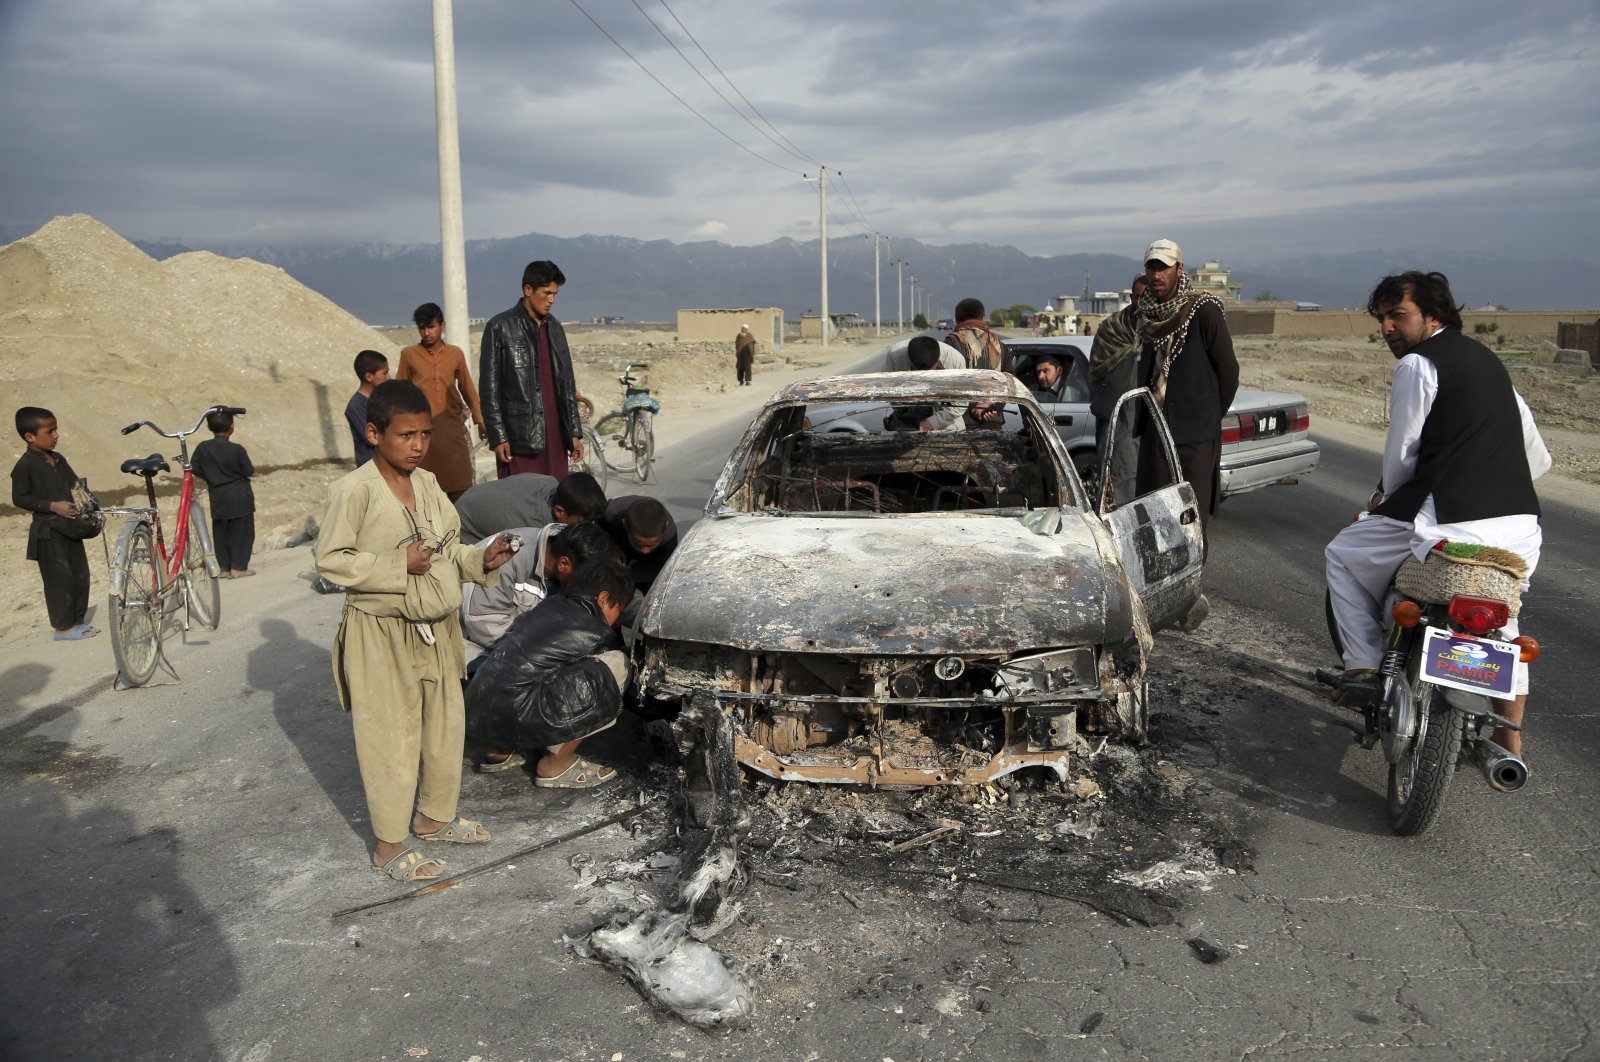 Afghans look at a civilian vehicle burnt after being shot by U.S. forces after an attack near the Bagram Air Base, north of Kabul, Afghanistan, April 9, 2019. (AP Photo)